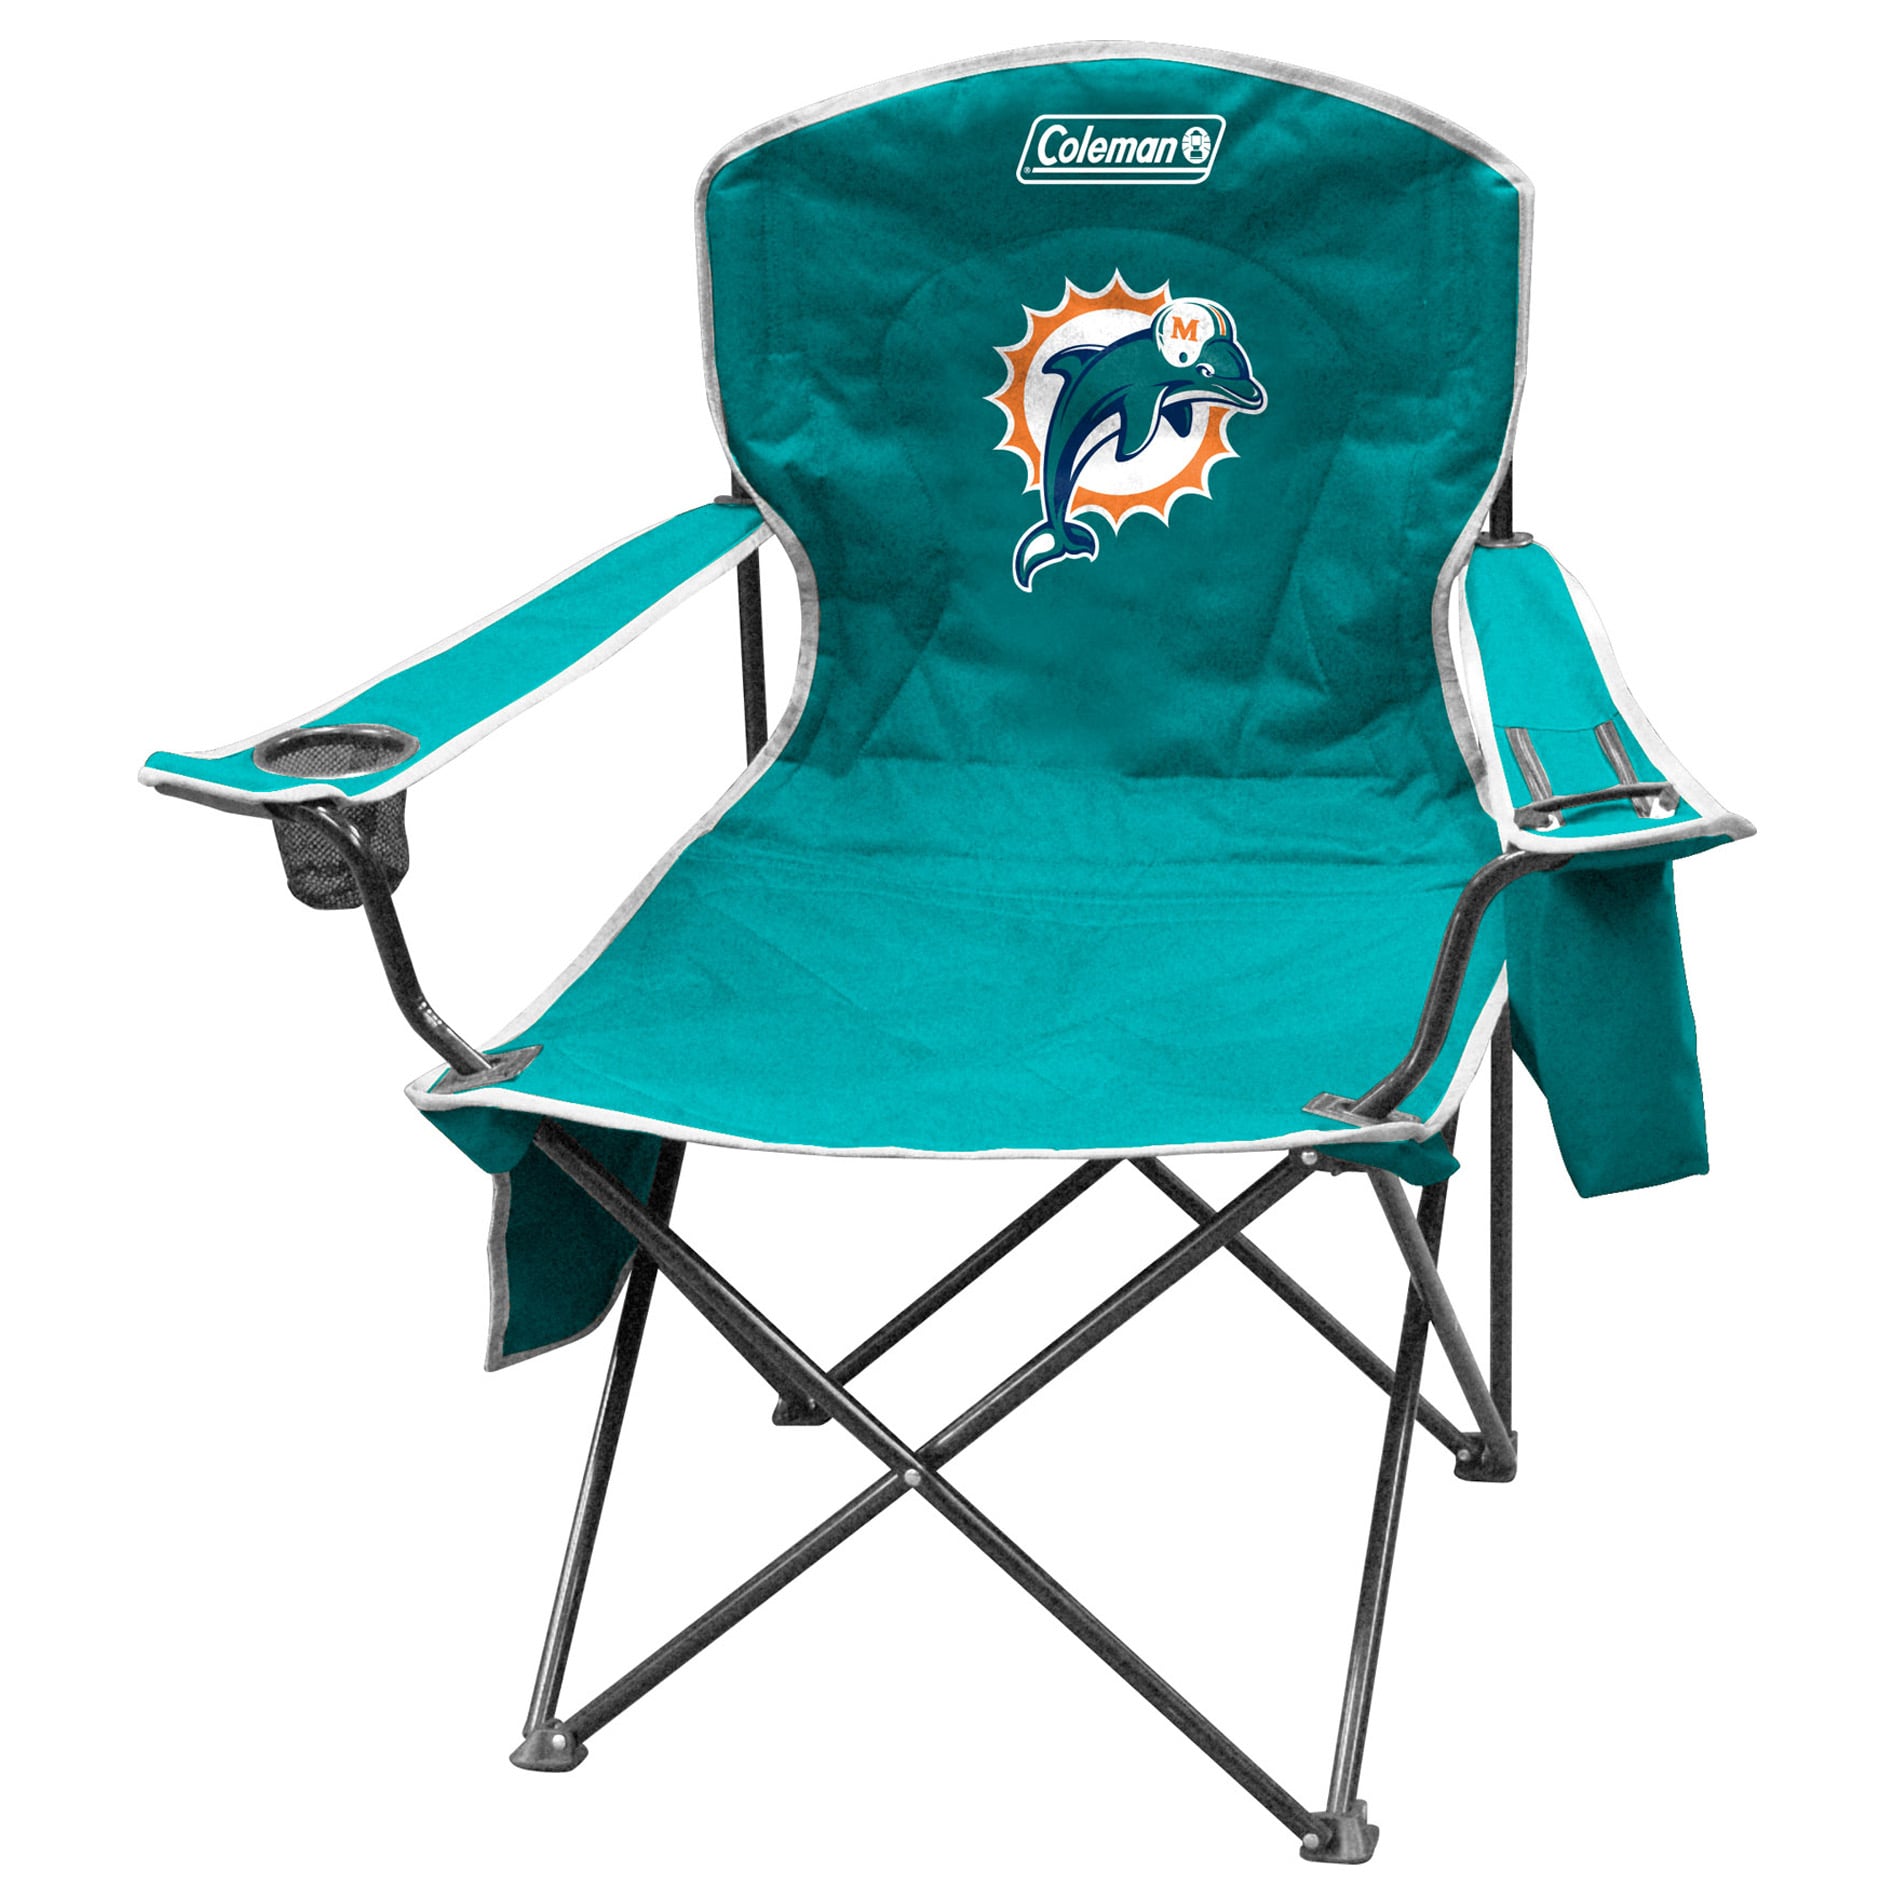 miami dolphins gaming chair